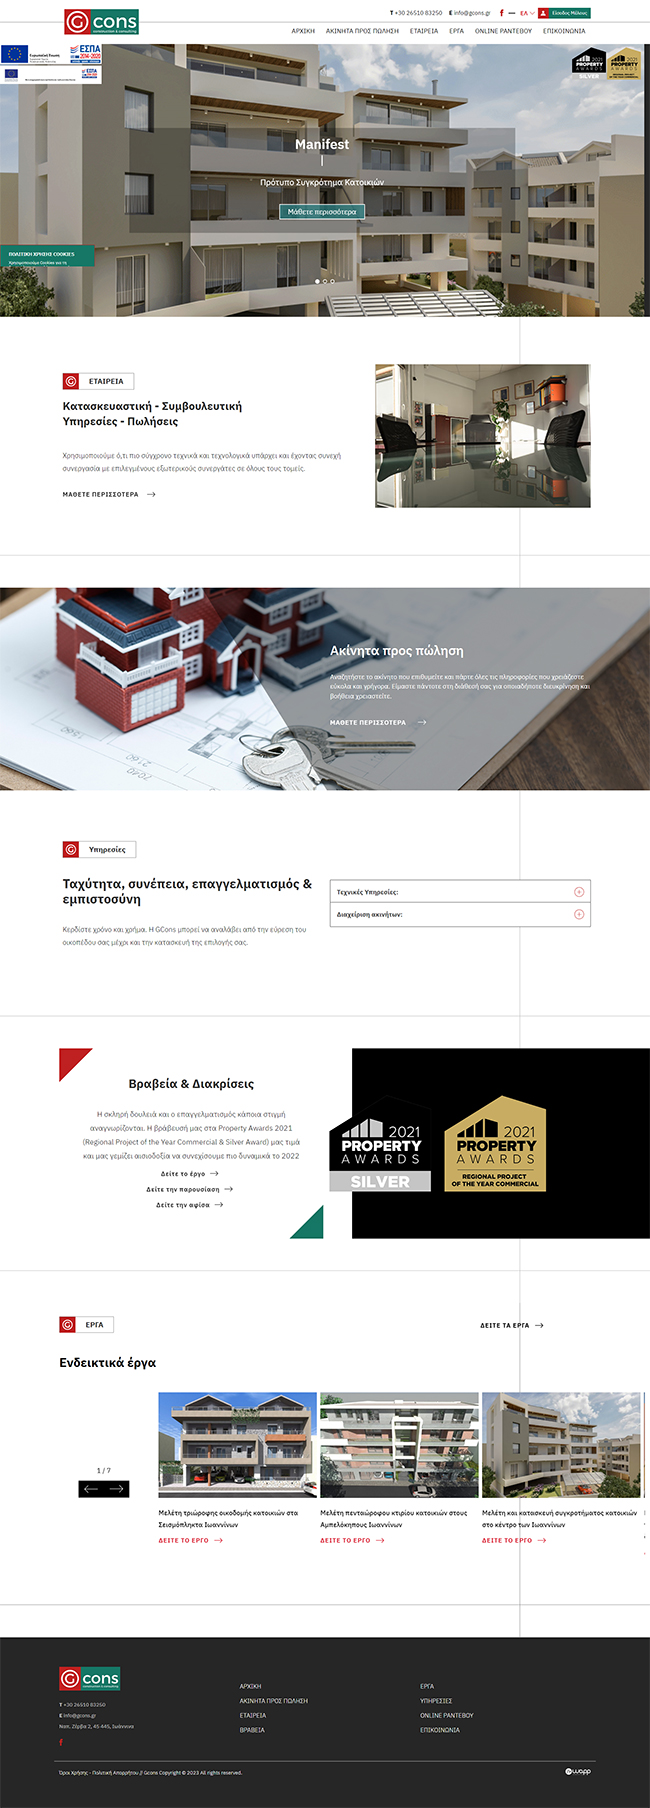 Responsive website for Gcons Construction & Consulting in Ioannina